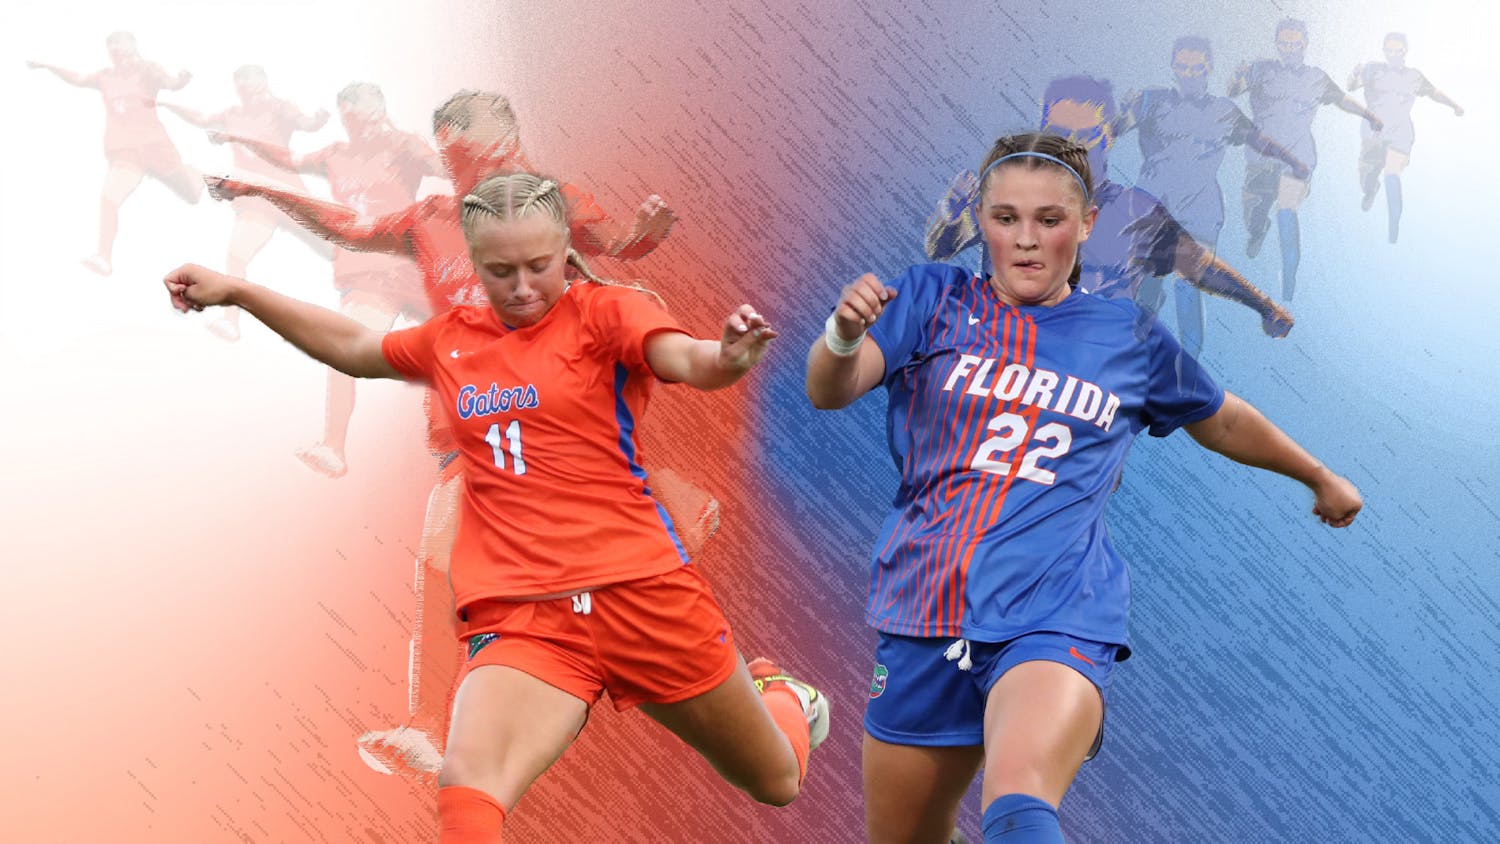 Sophie White and Oakley Rasmussen stuck together from youth soccer in Utah to the Gators soccer program in Gainesville.